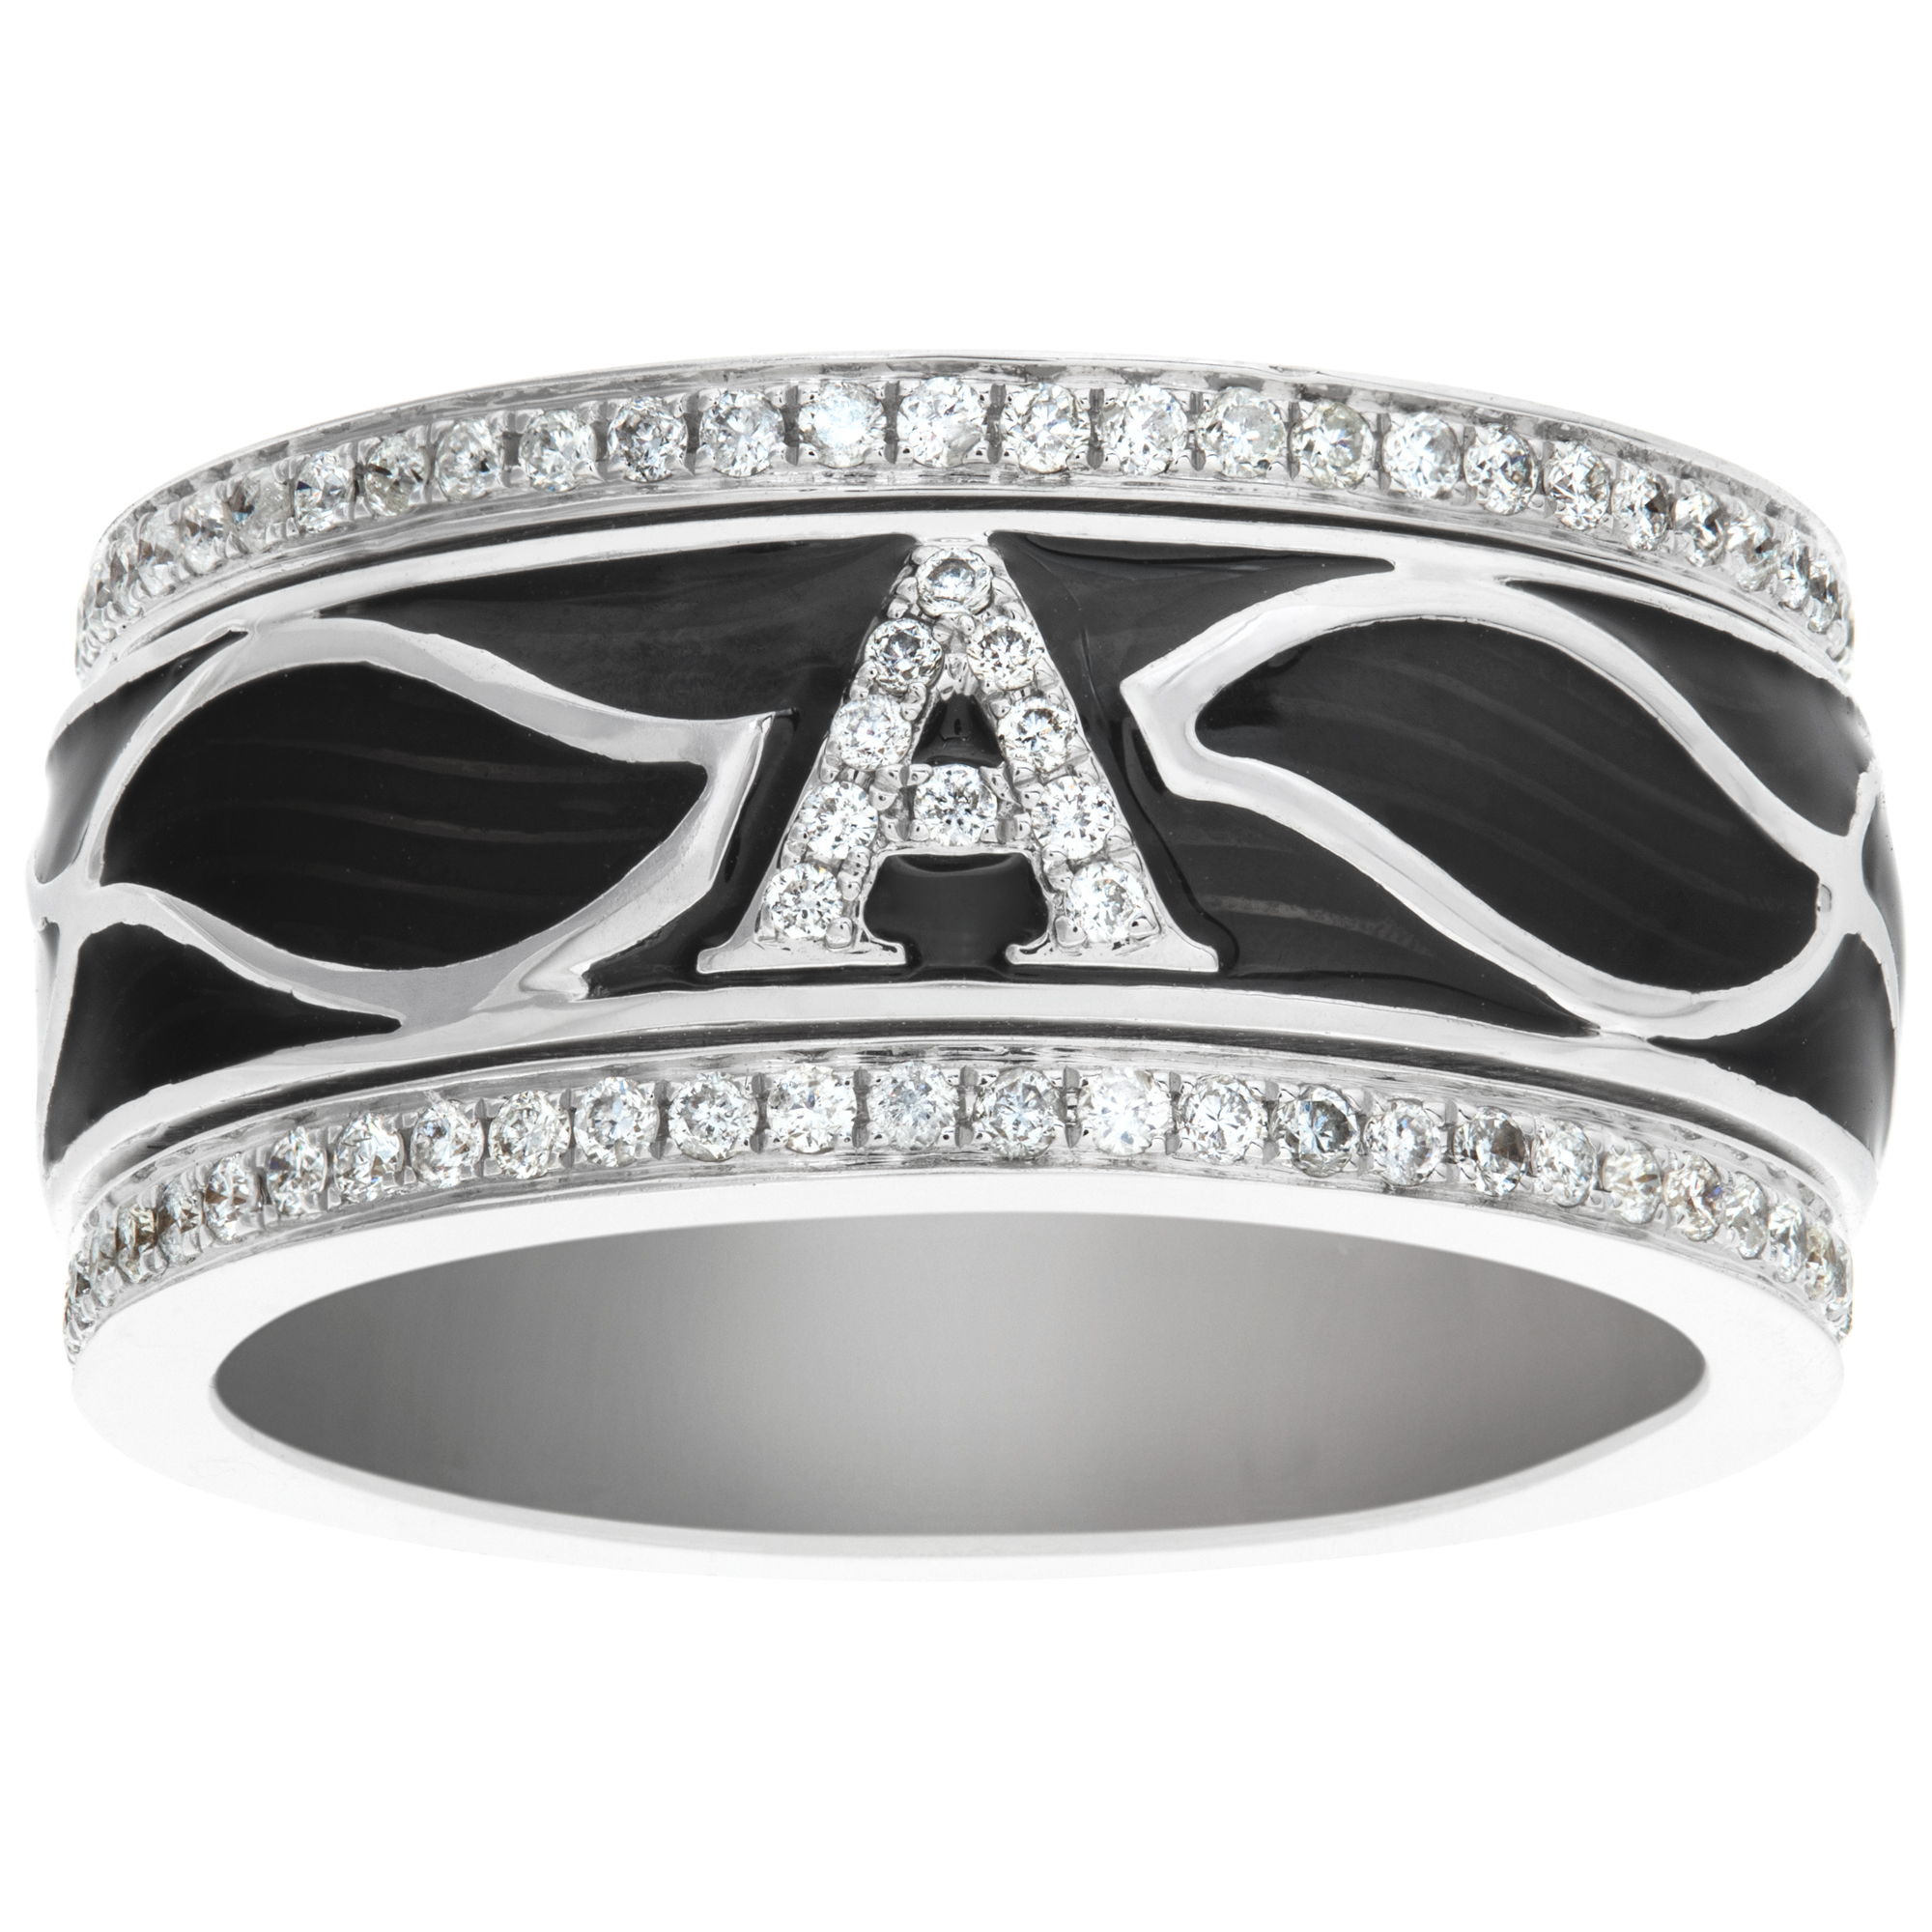 Black enamel and diamond ring with initial "A" set in diamonds - 18k white gold image 1